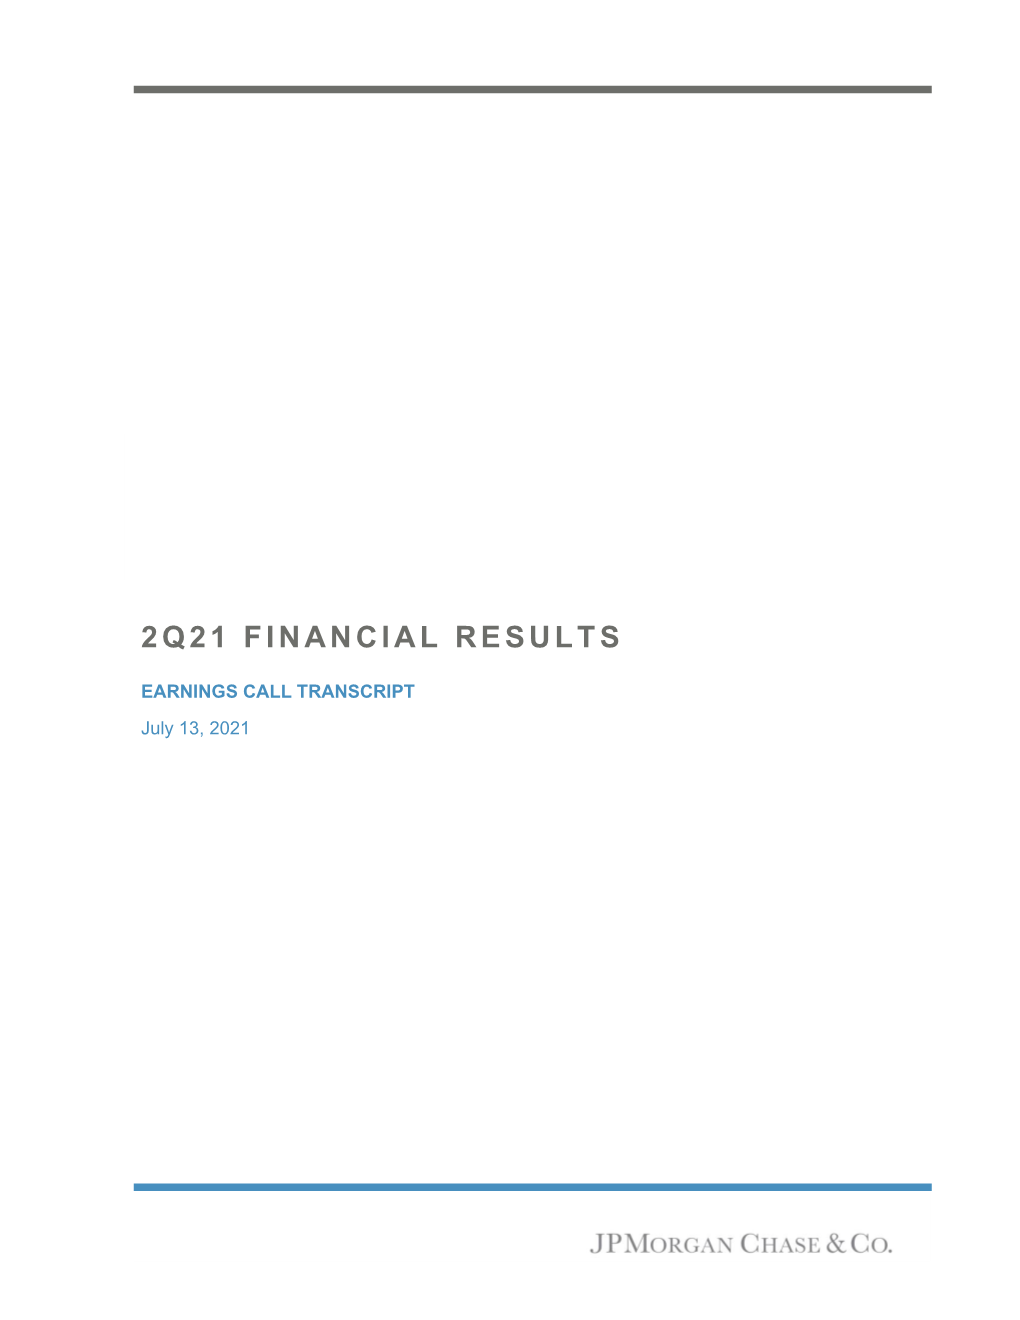 2Q21 Financial Results